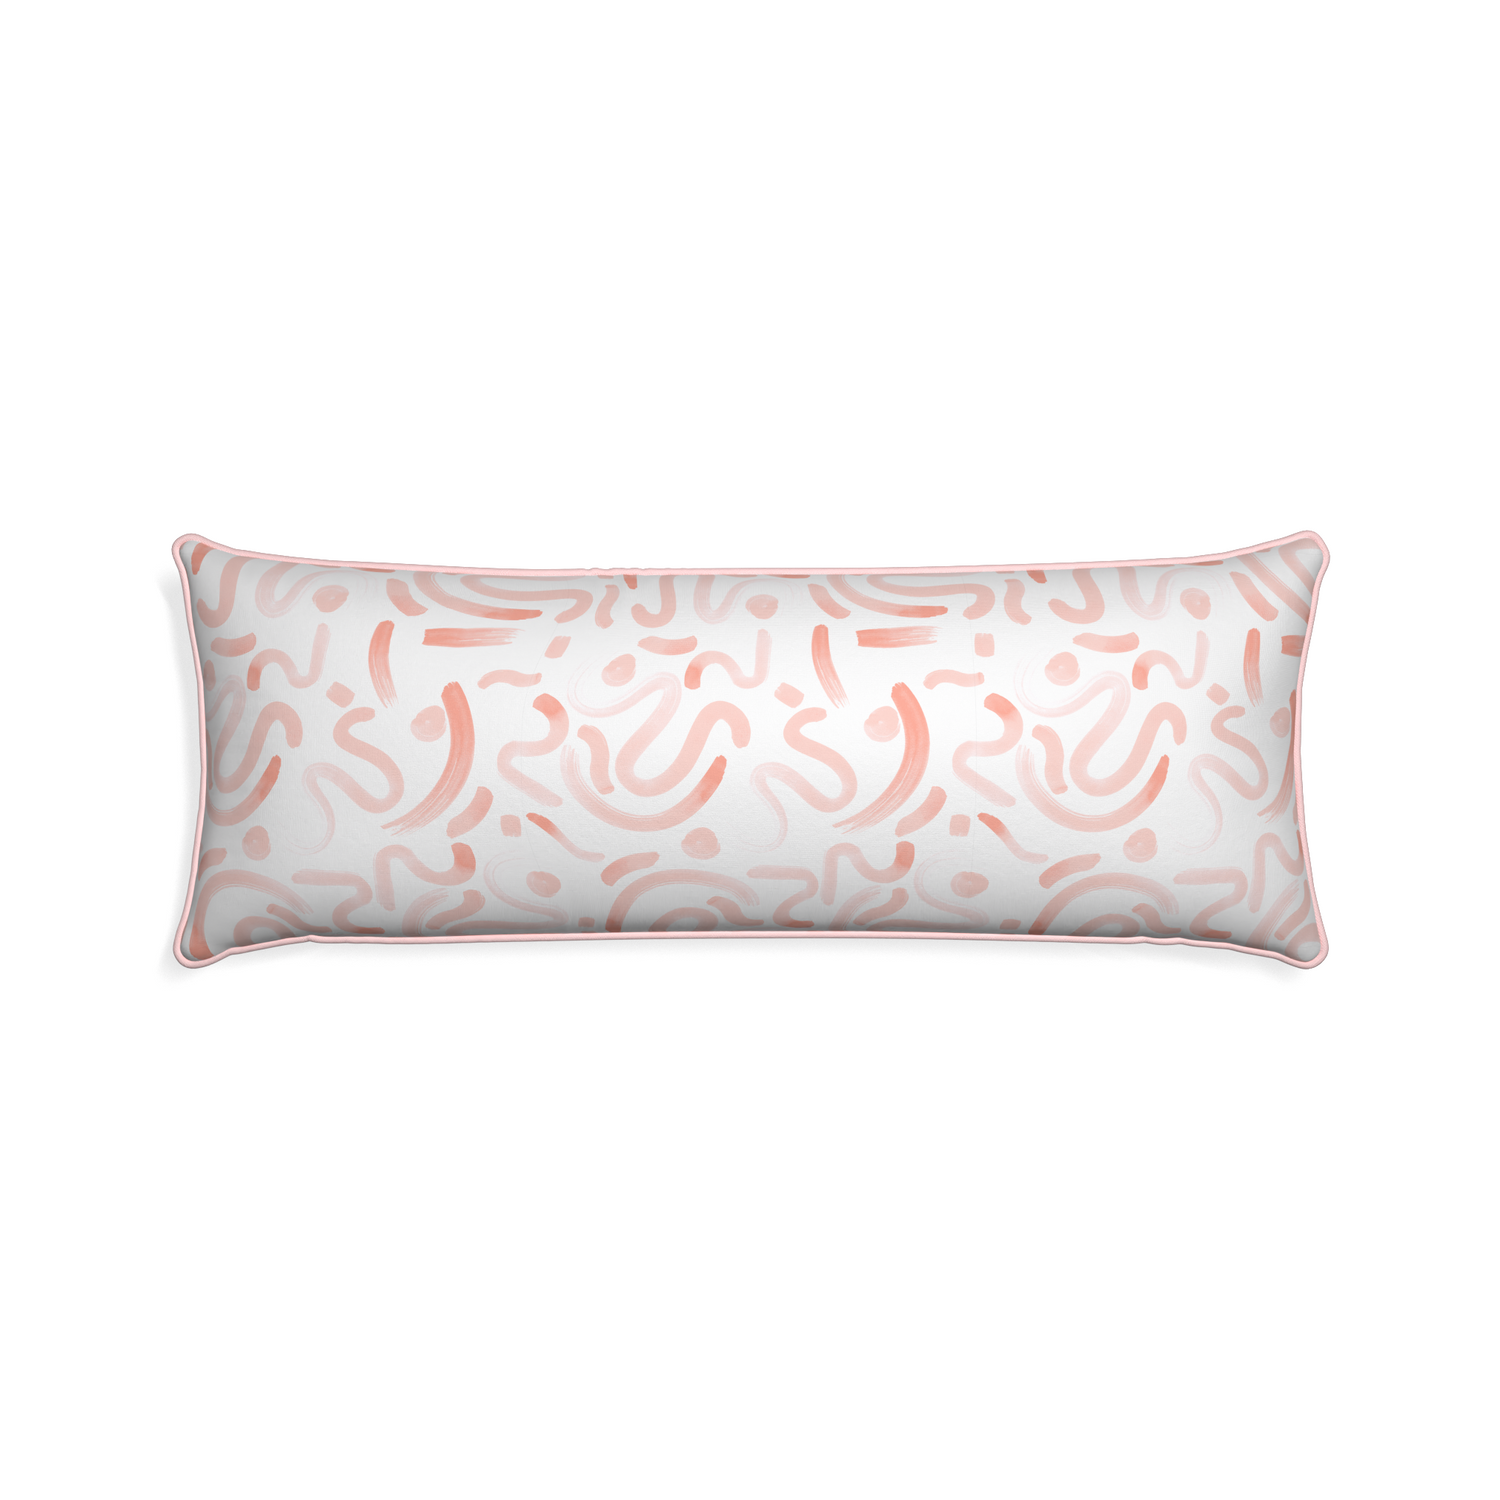 Xl-lumbar hockney pink custom pillow with petal piping on white background